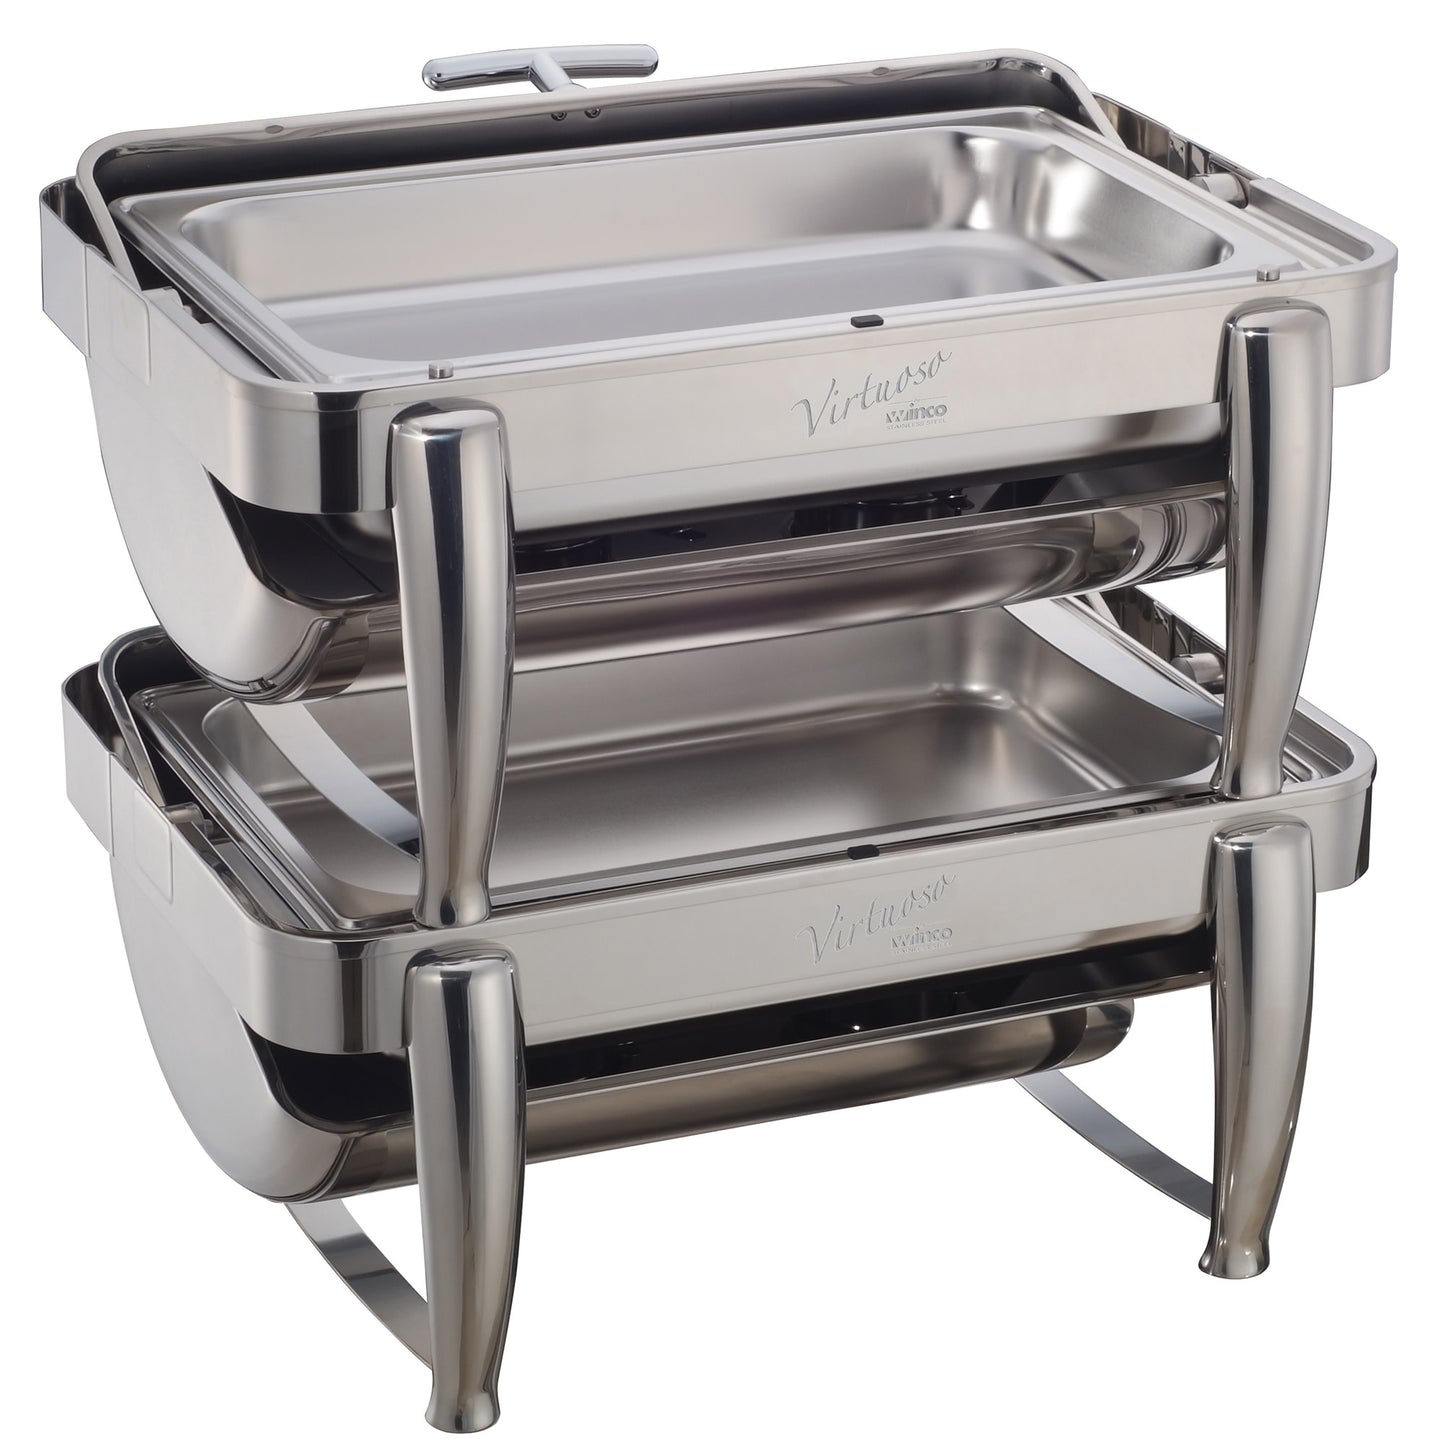 Virtuoso Collection 8 Quart Full-size Roll-Top Chafer, Extra Heavyweight